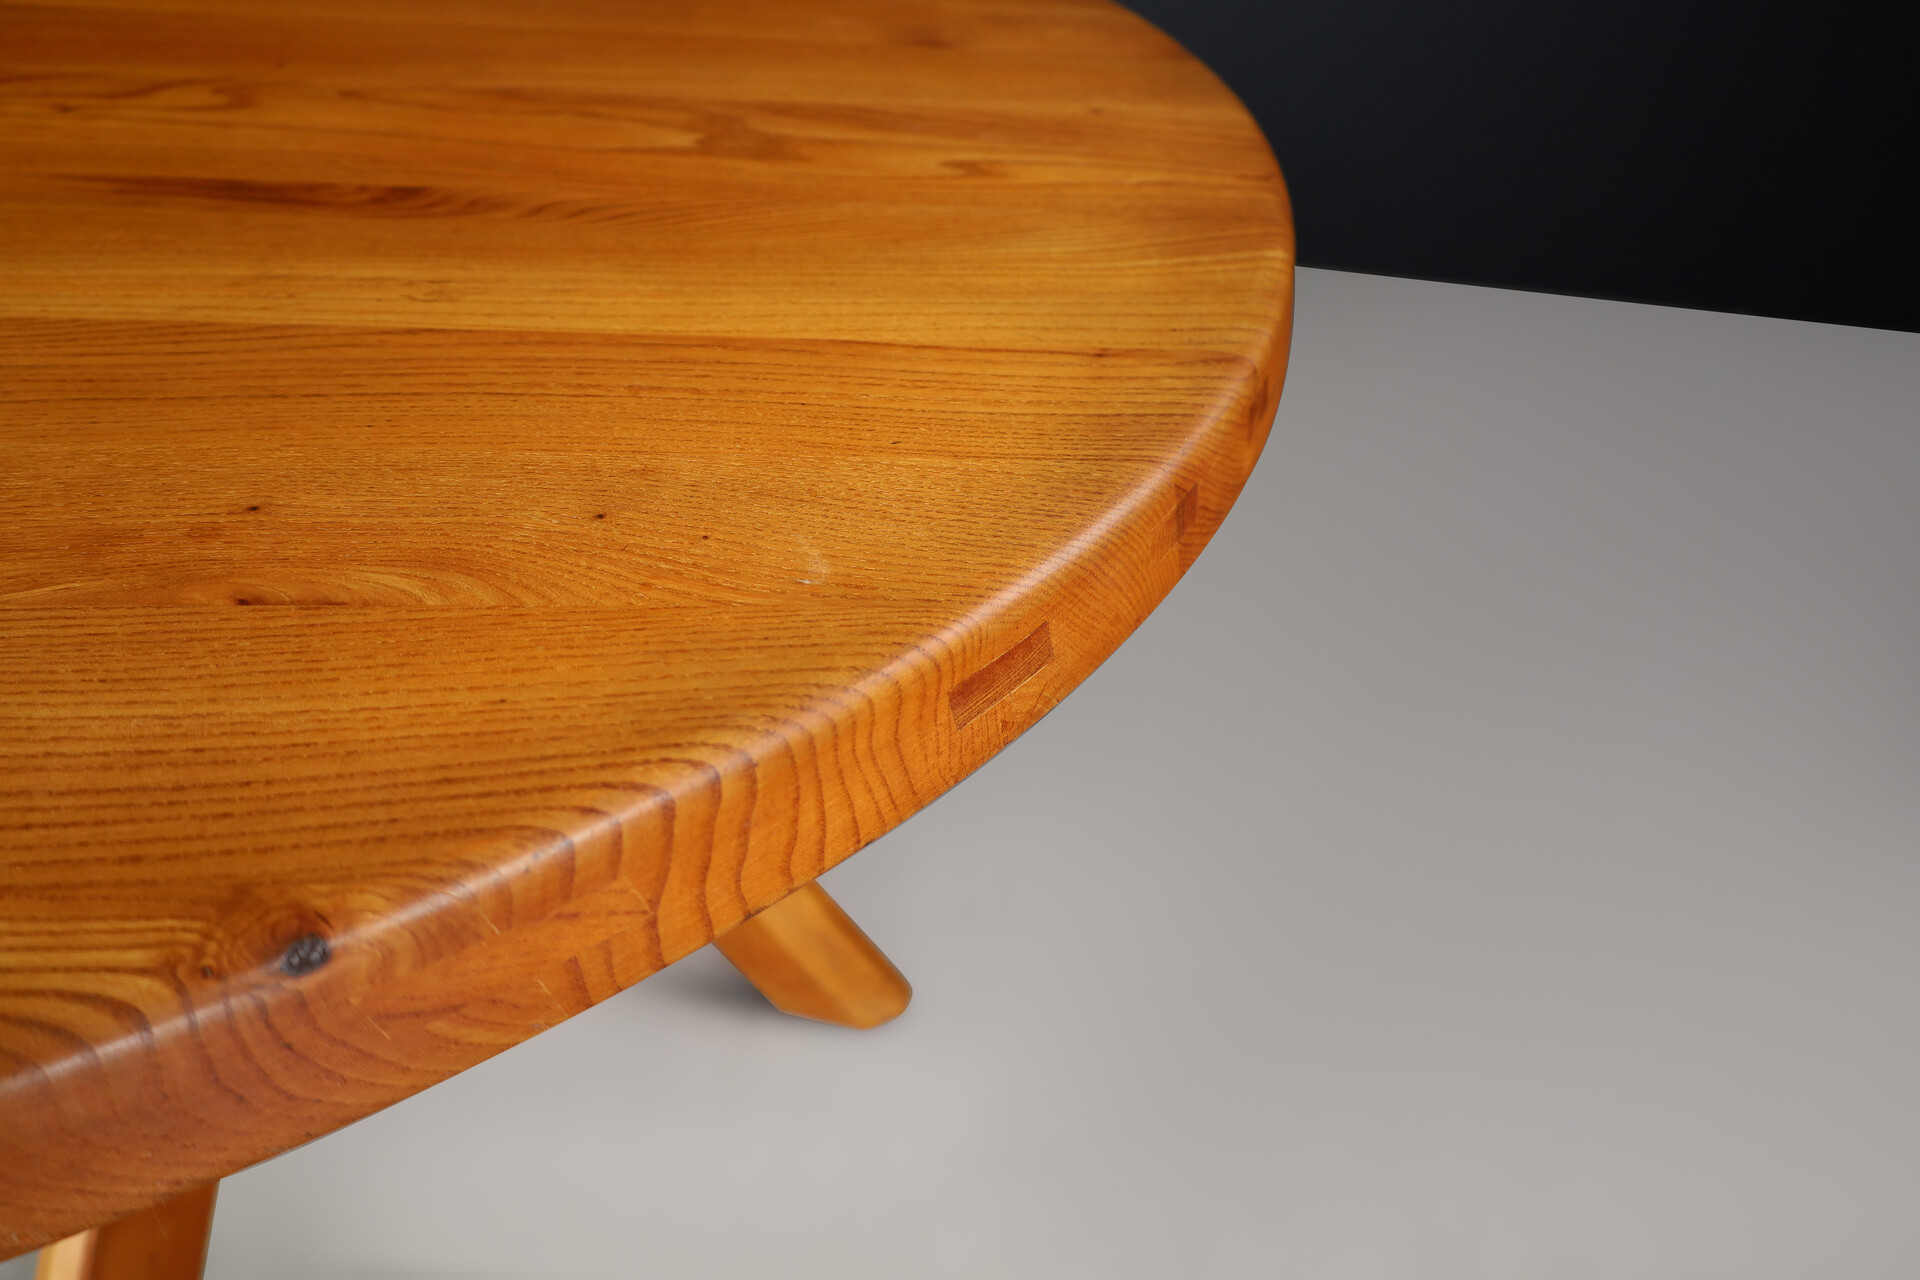 Mid century modern Pierre Chapo 'T21C' Sfax Round Dining Table made of Solid Elm, France 1969 Mid-20th century